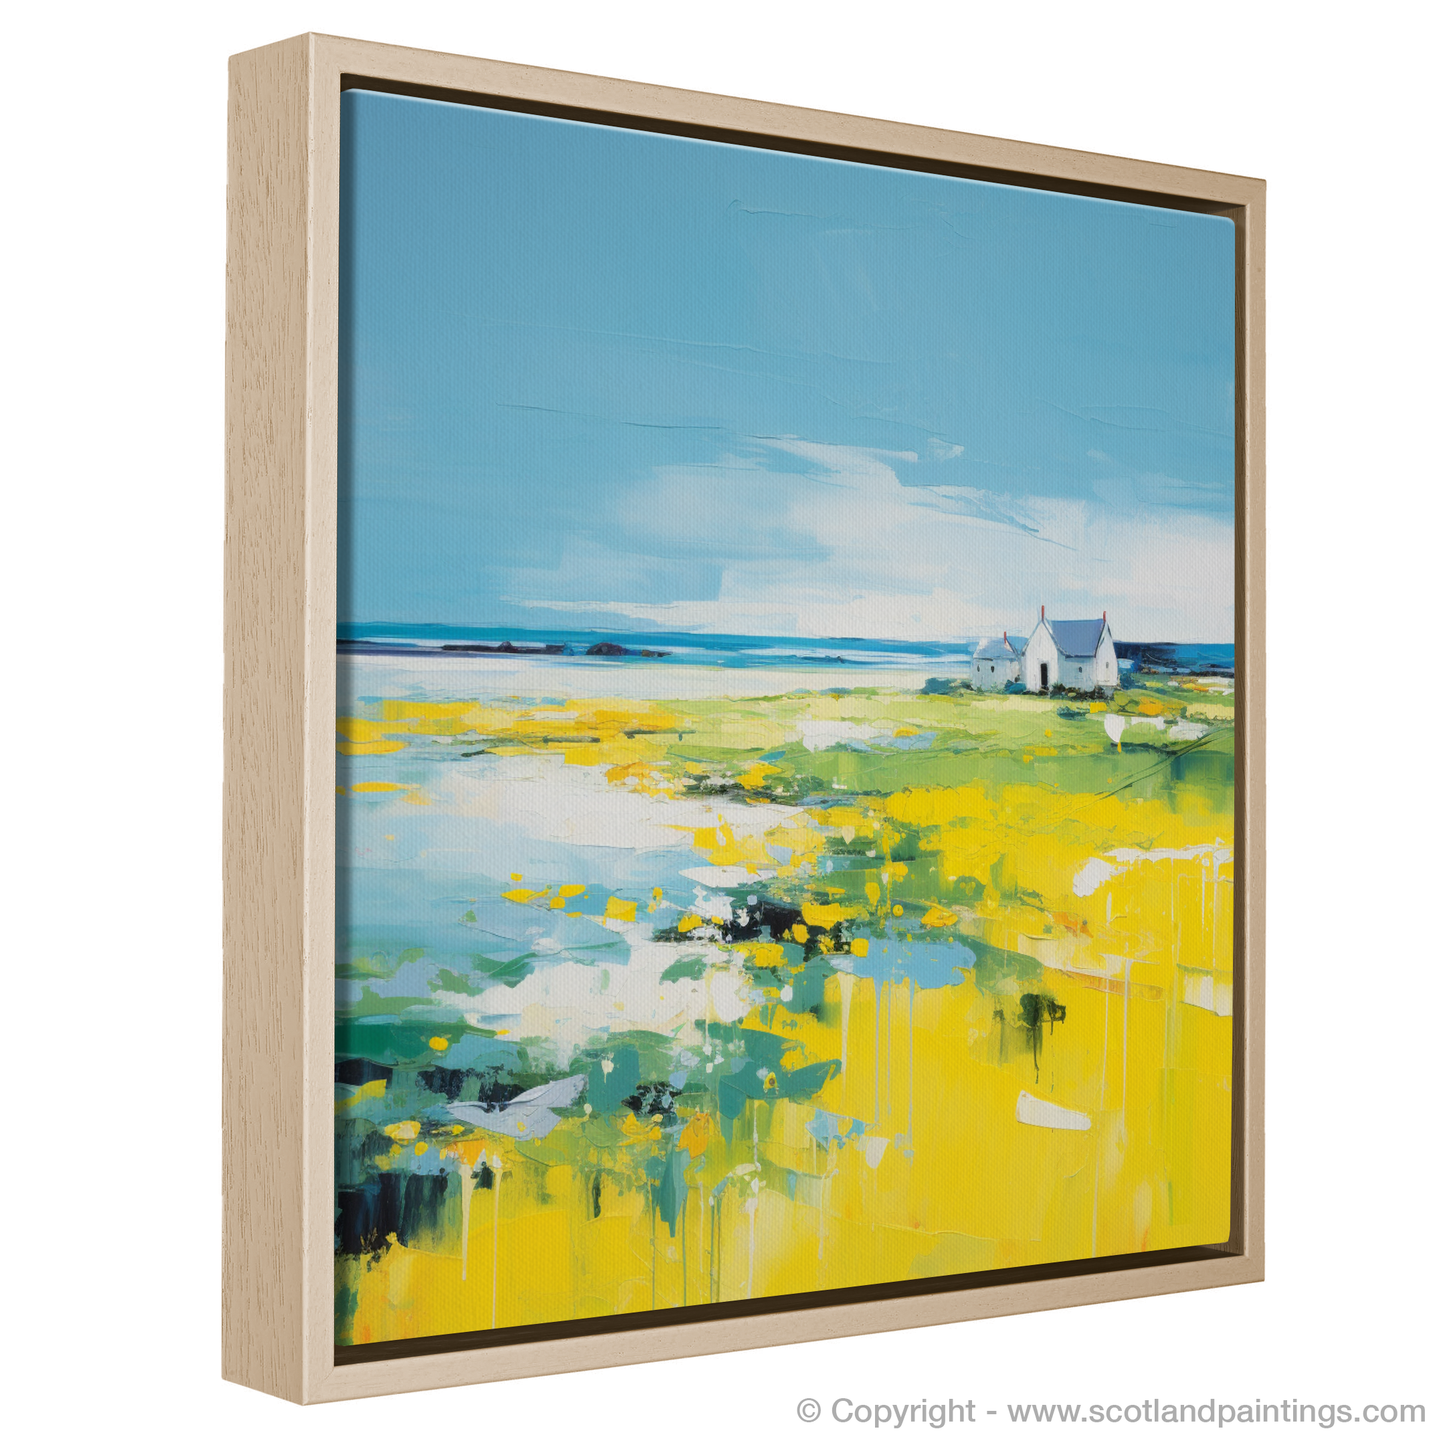 Painting and Art Print of Isle of Tiree, Inner Hebrides in summer entitled "Summer Splendour of Isle of Tiree".